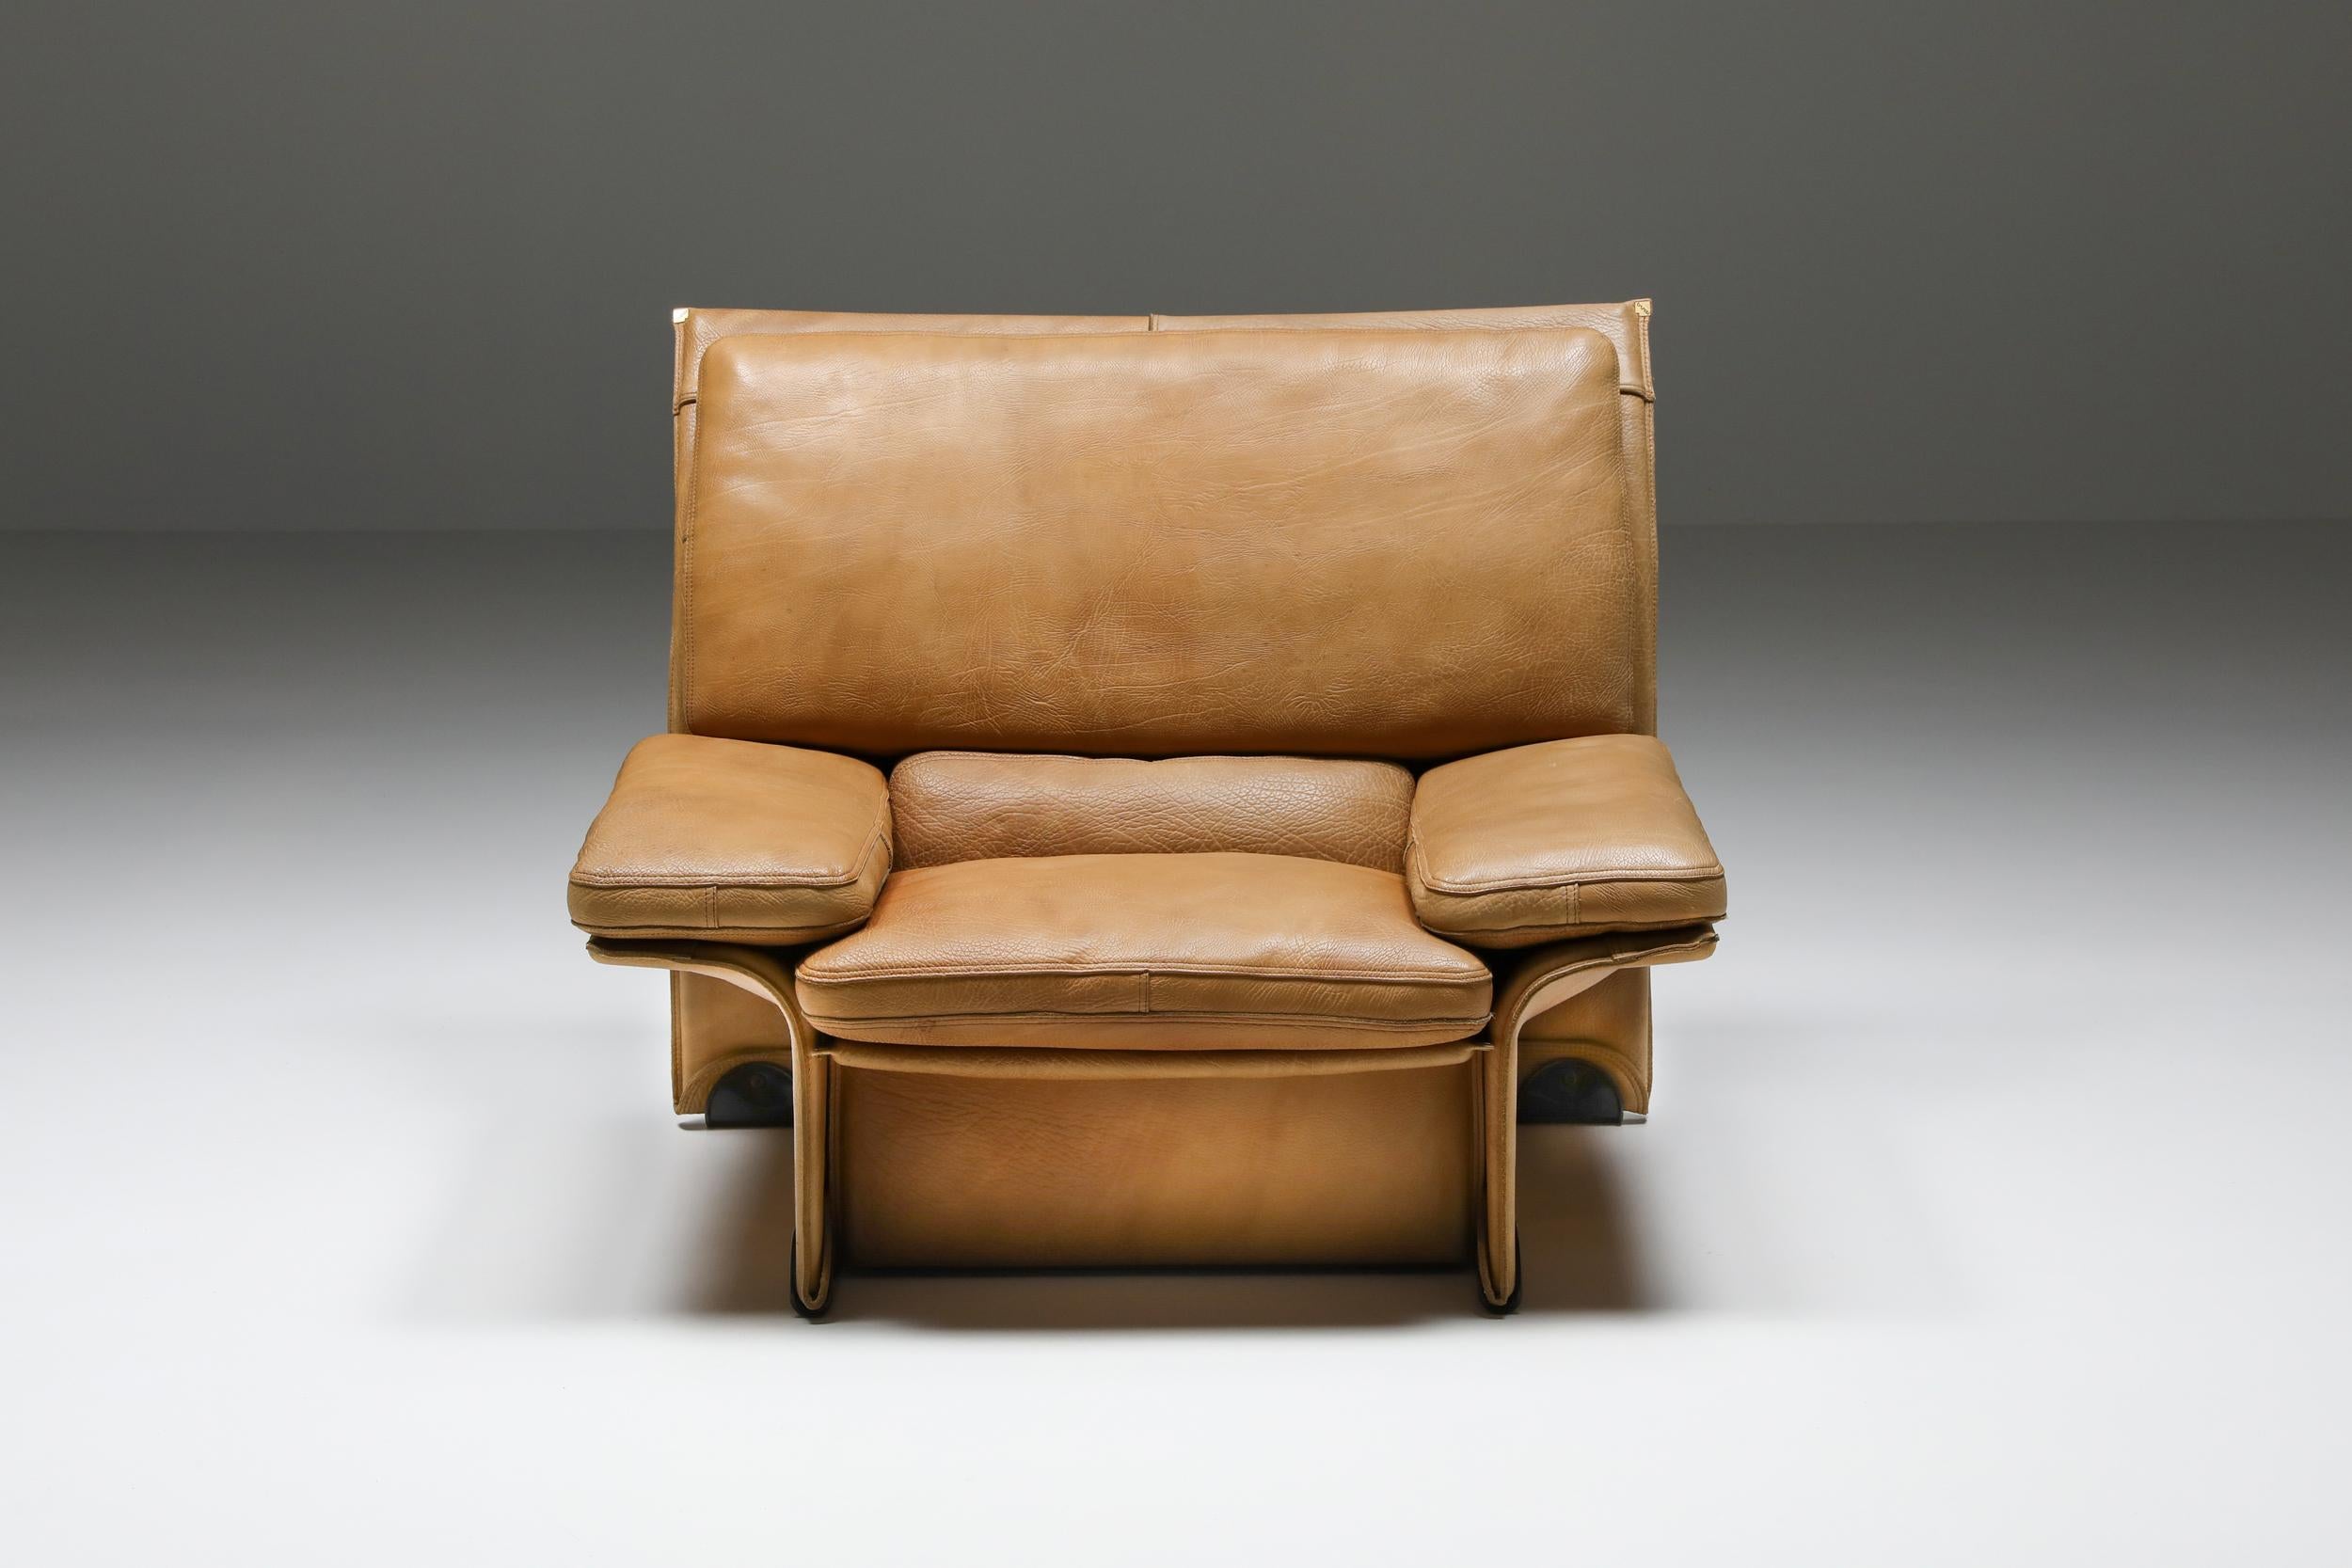 20th Century Brunati Camel Leather Club Chairs, Mid-Century Modern, Italy, 1970's For Sale